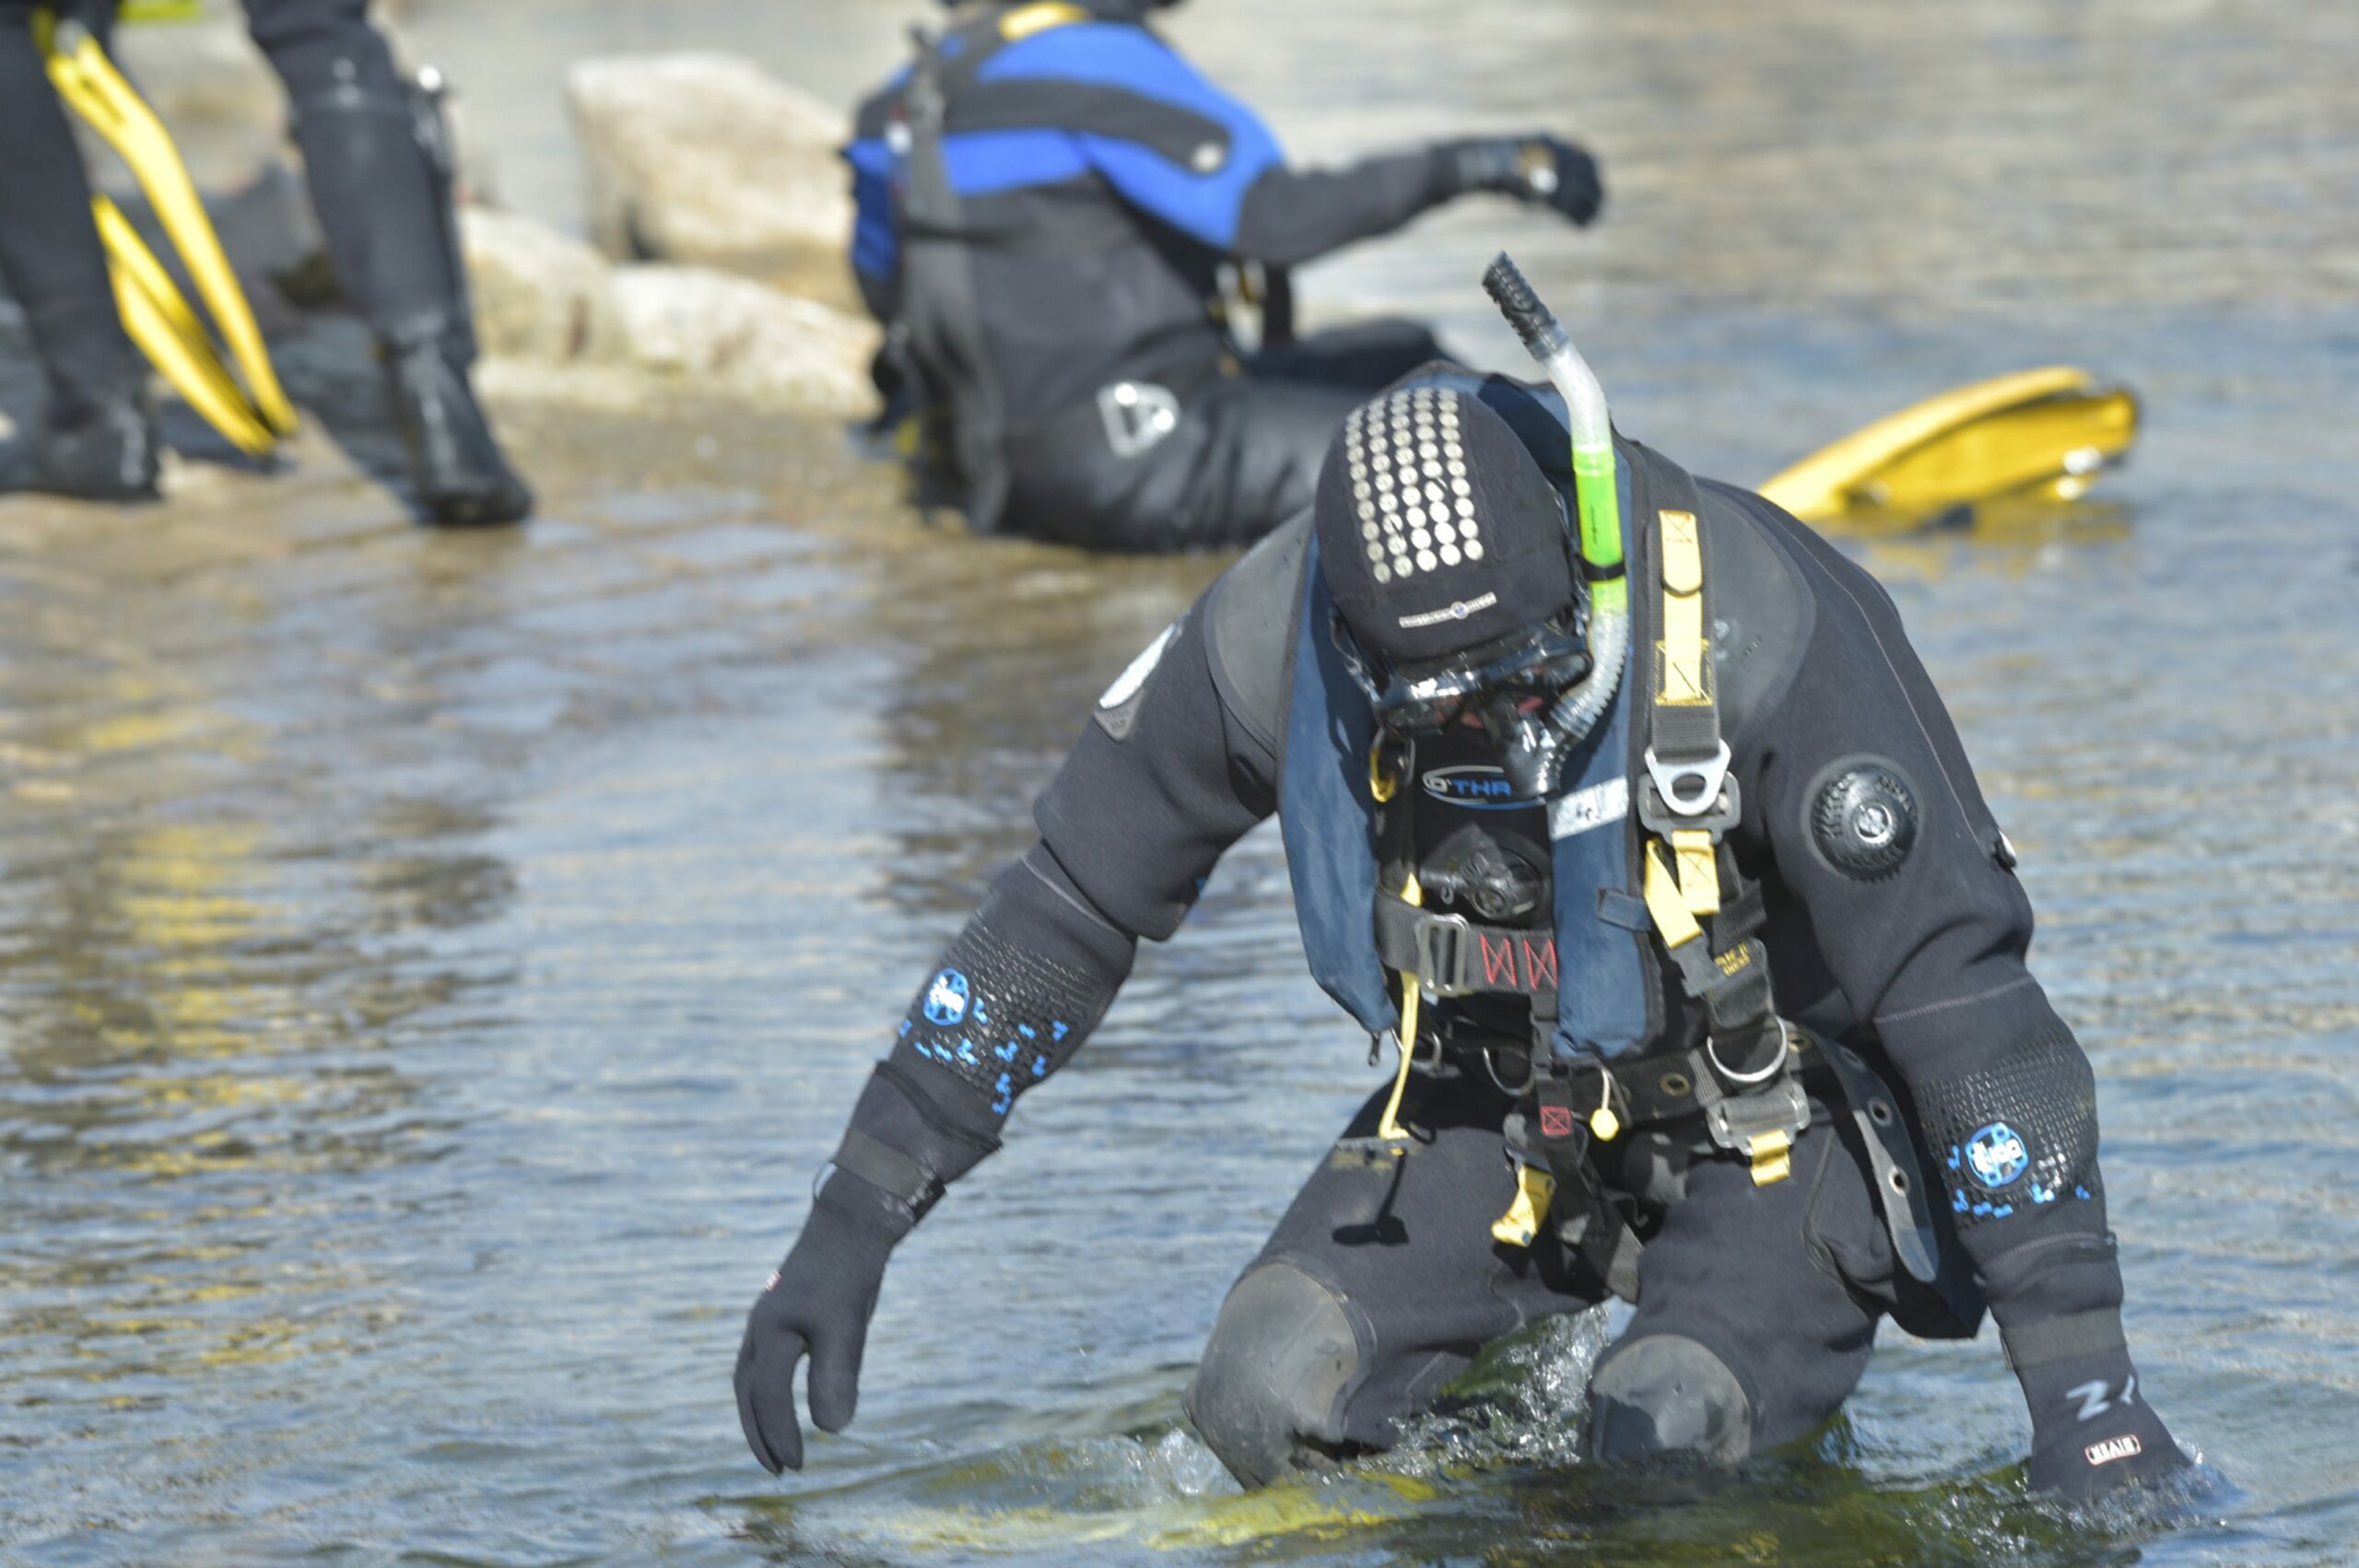 Police divers in the water.